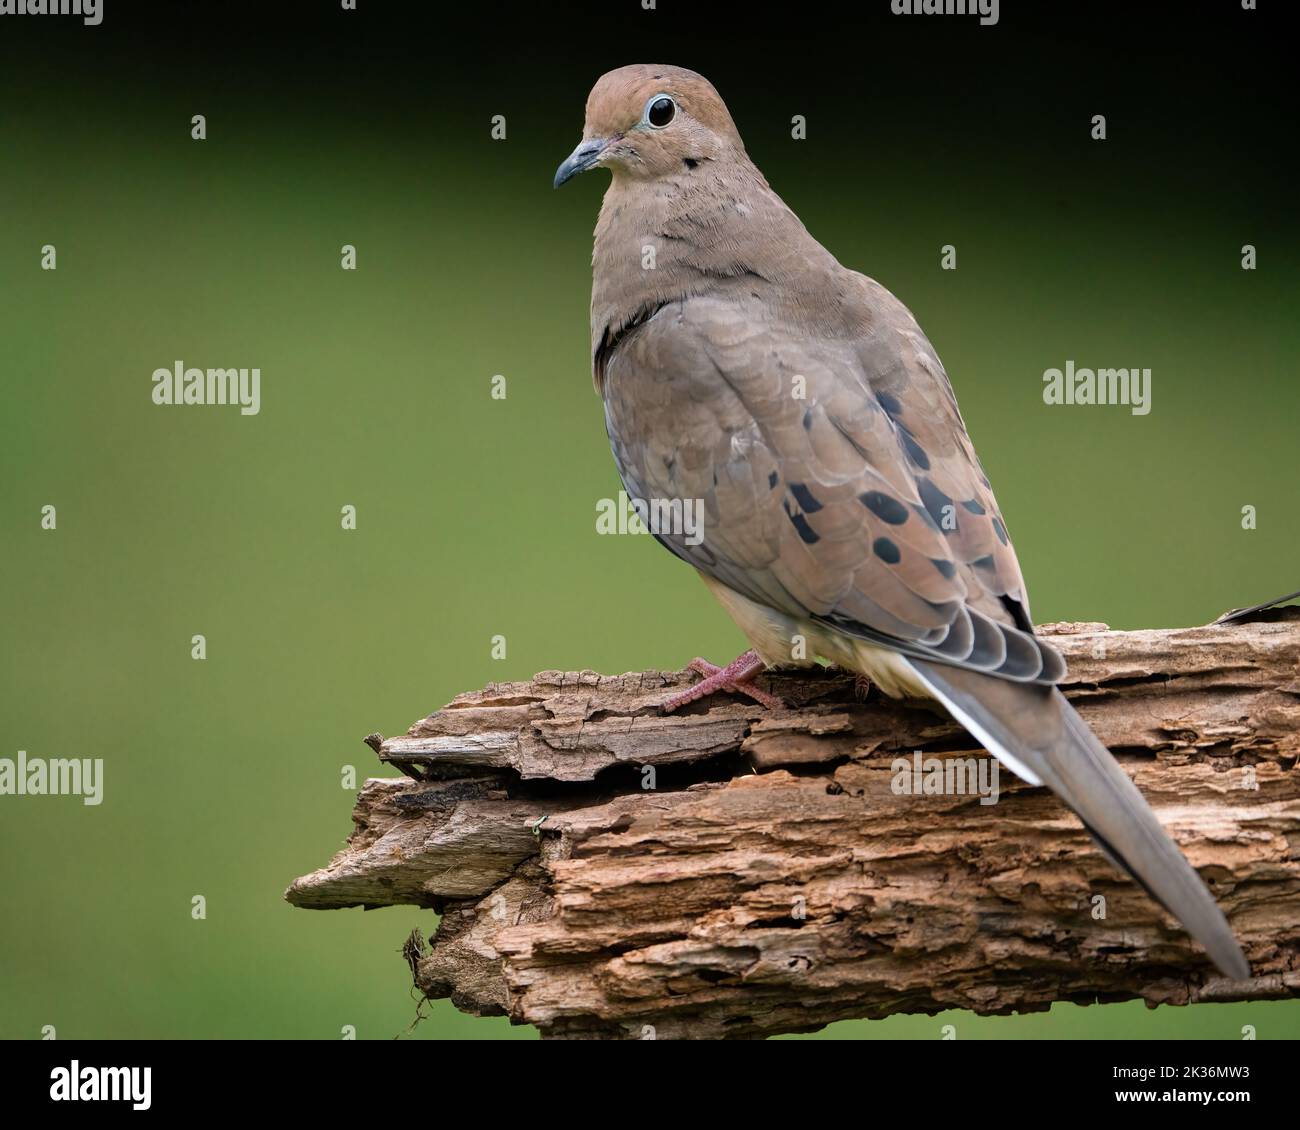 A mourning dove perched on a log. Stock Photo